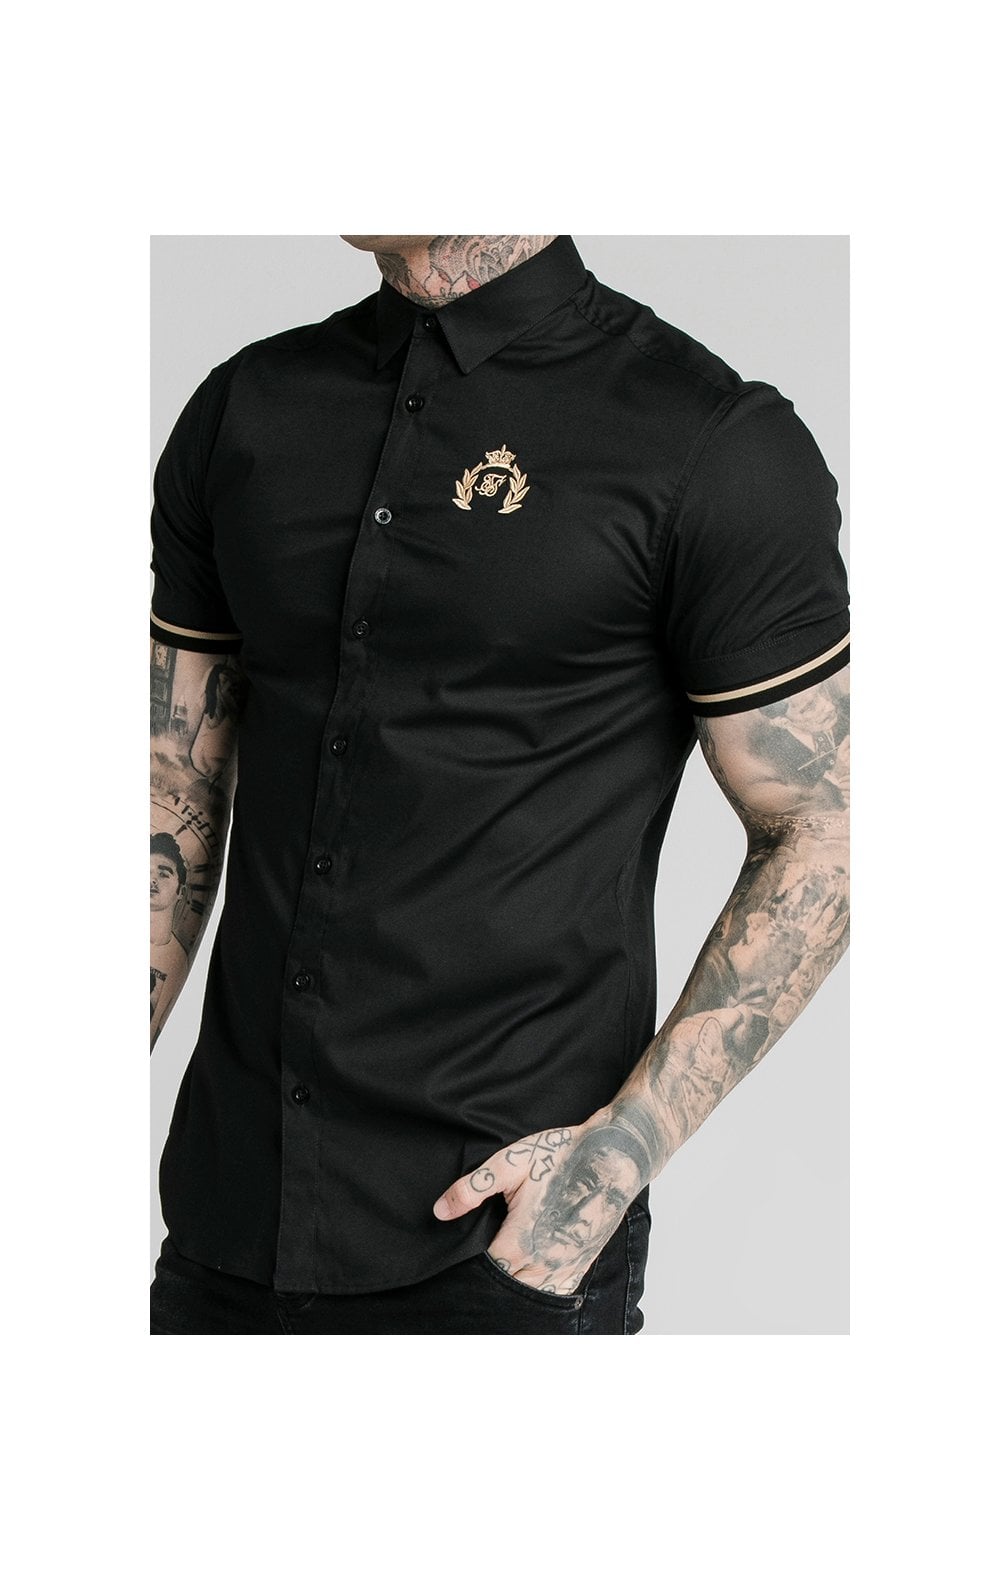 Load image into Gallery viewer, SikSilk S/S Prestige Inset Cuff Shirt - Black (1)